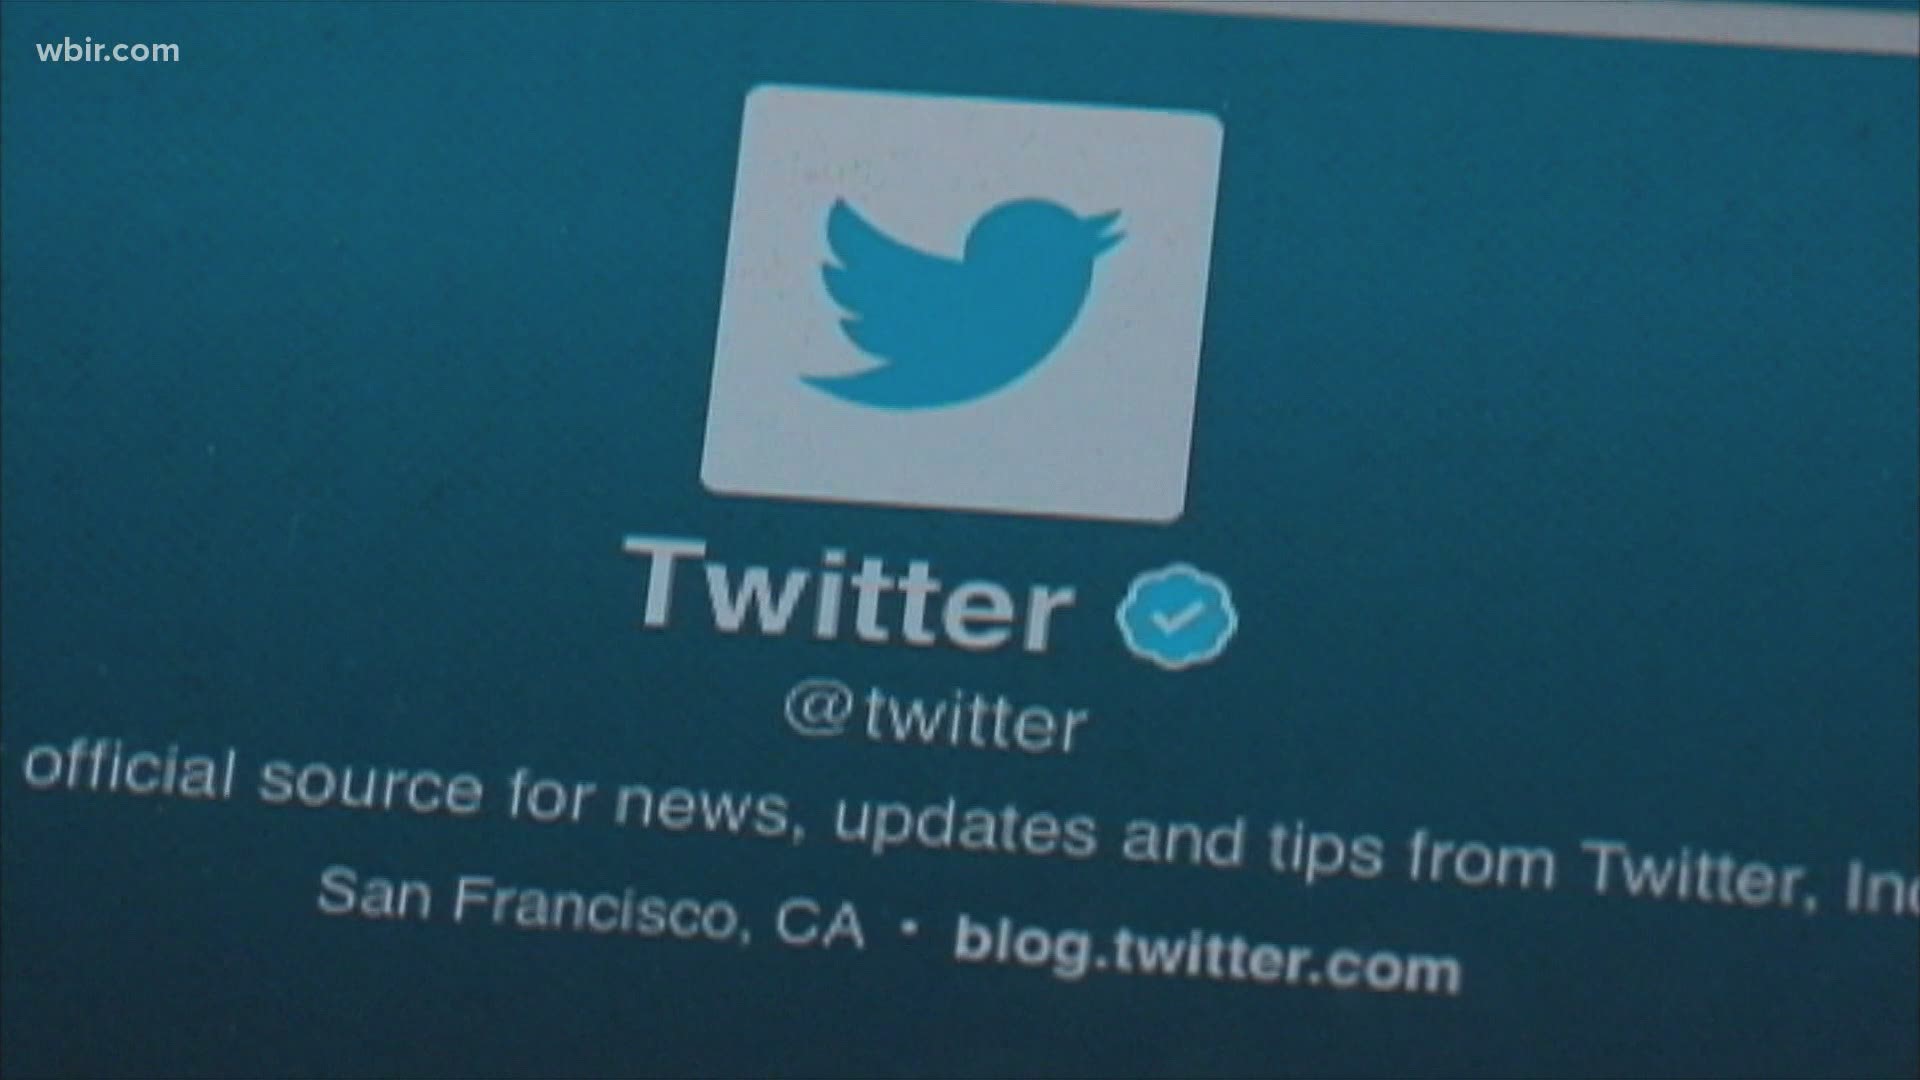 Twitter works on new app feature that will allow users to control who mentions them.